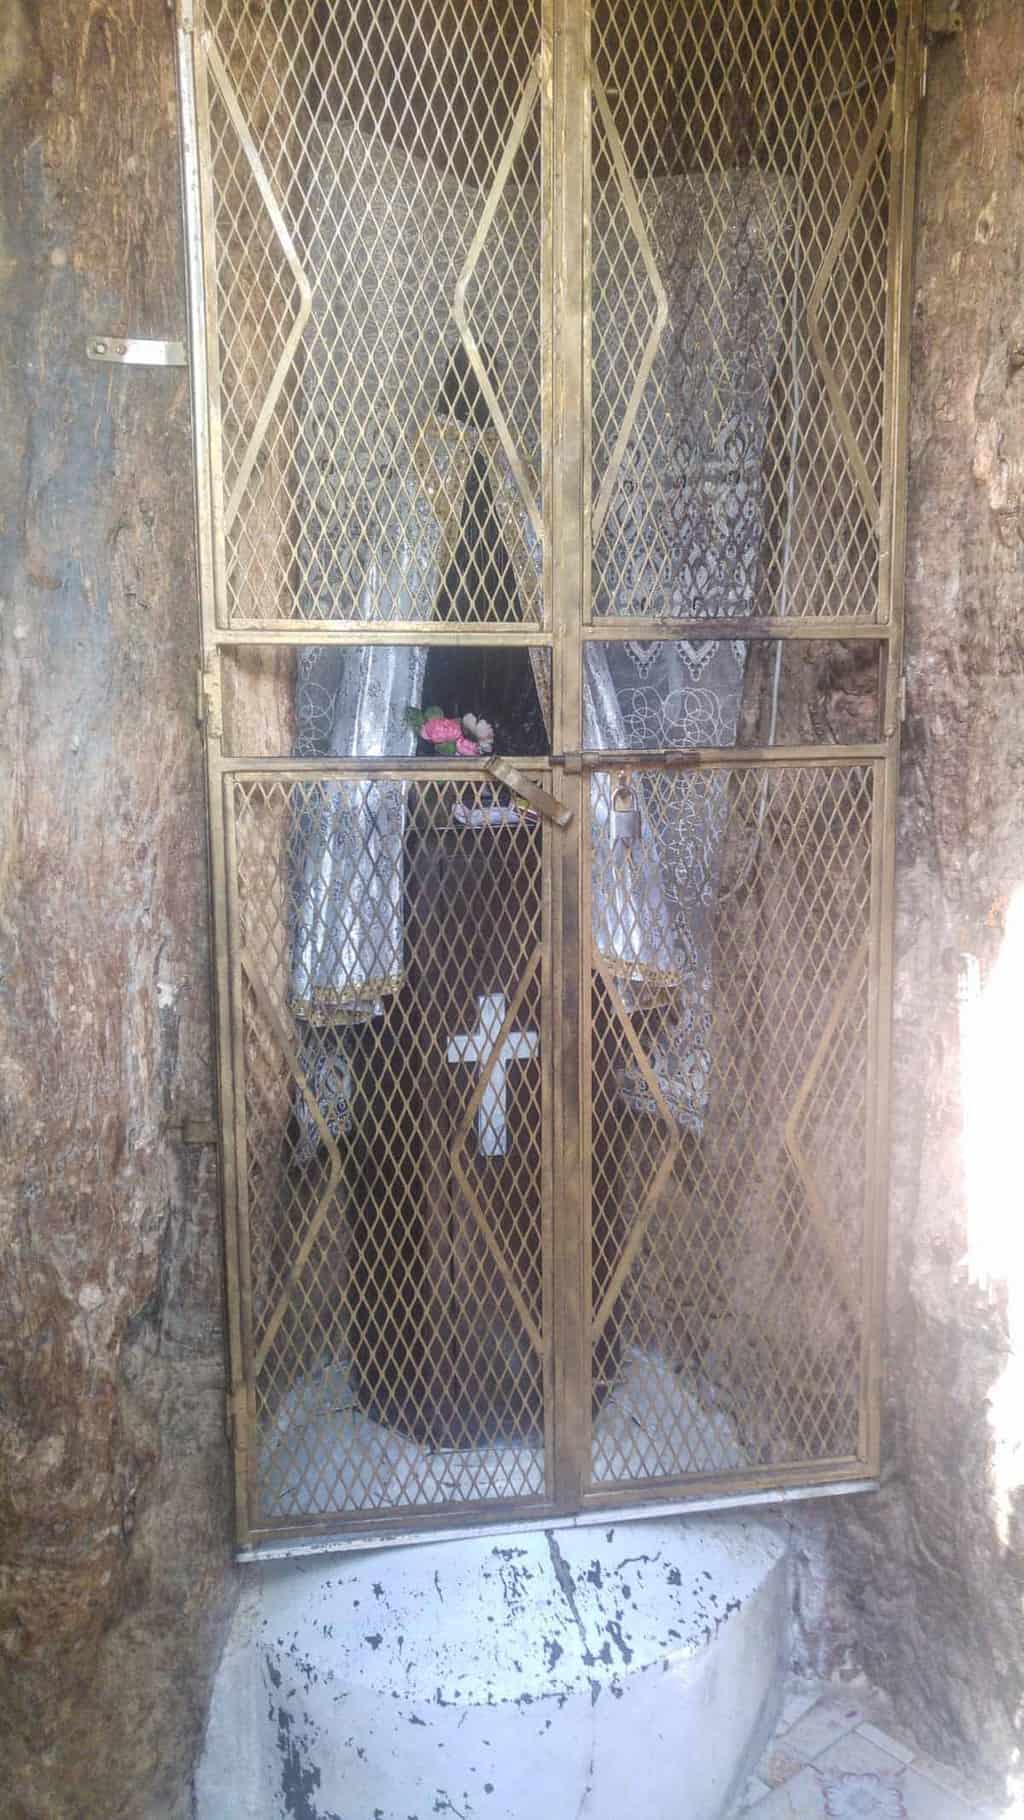 The Holy tree of The Shrine of our lady of Dearit in eritrea